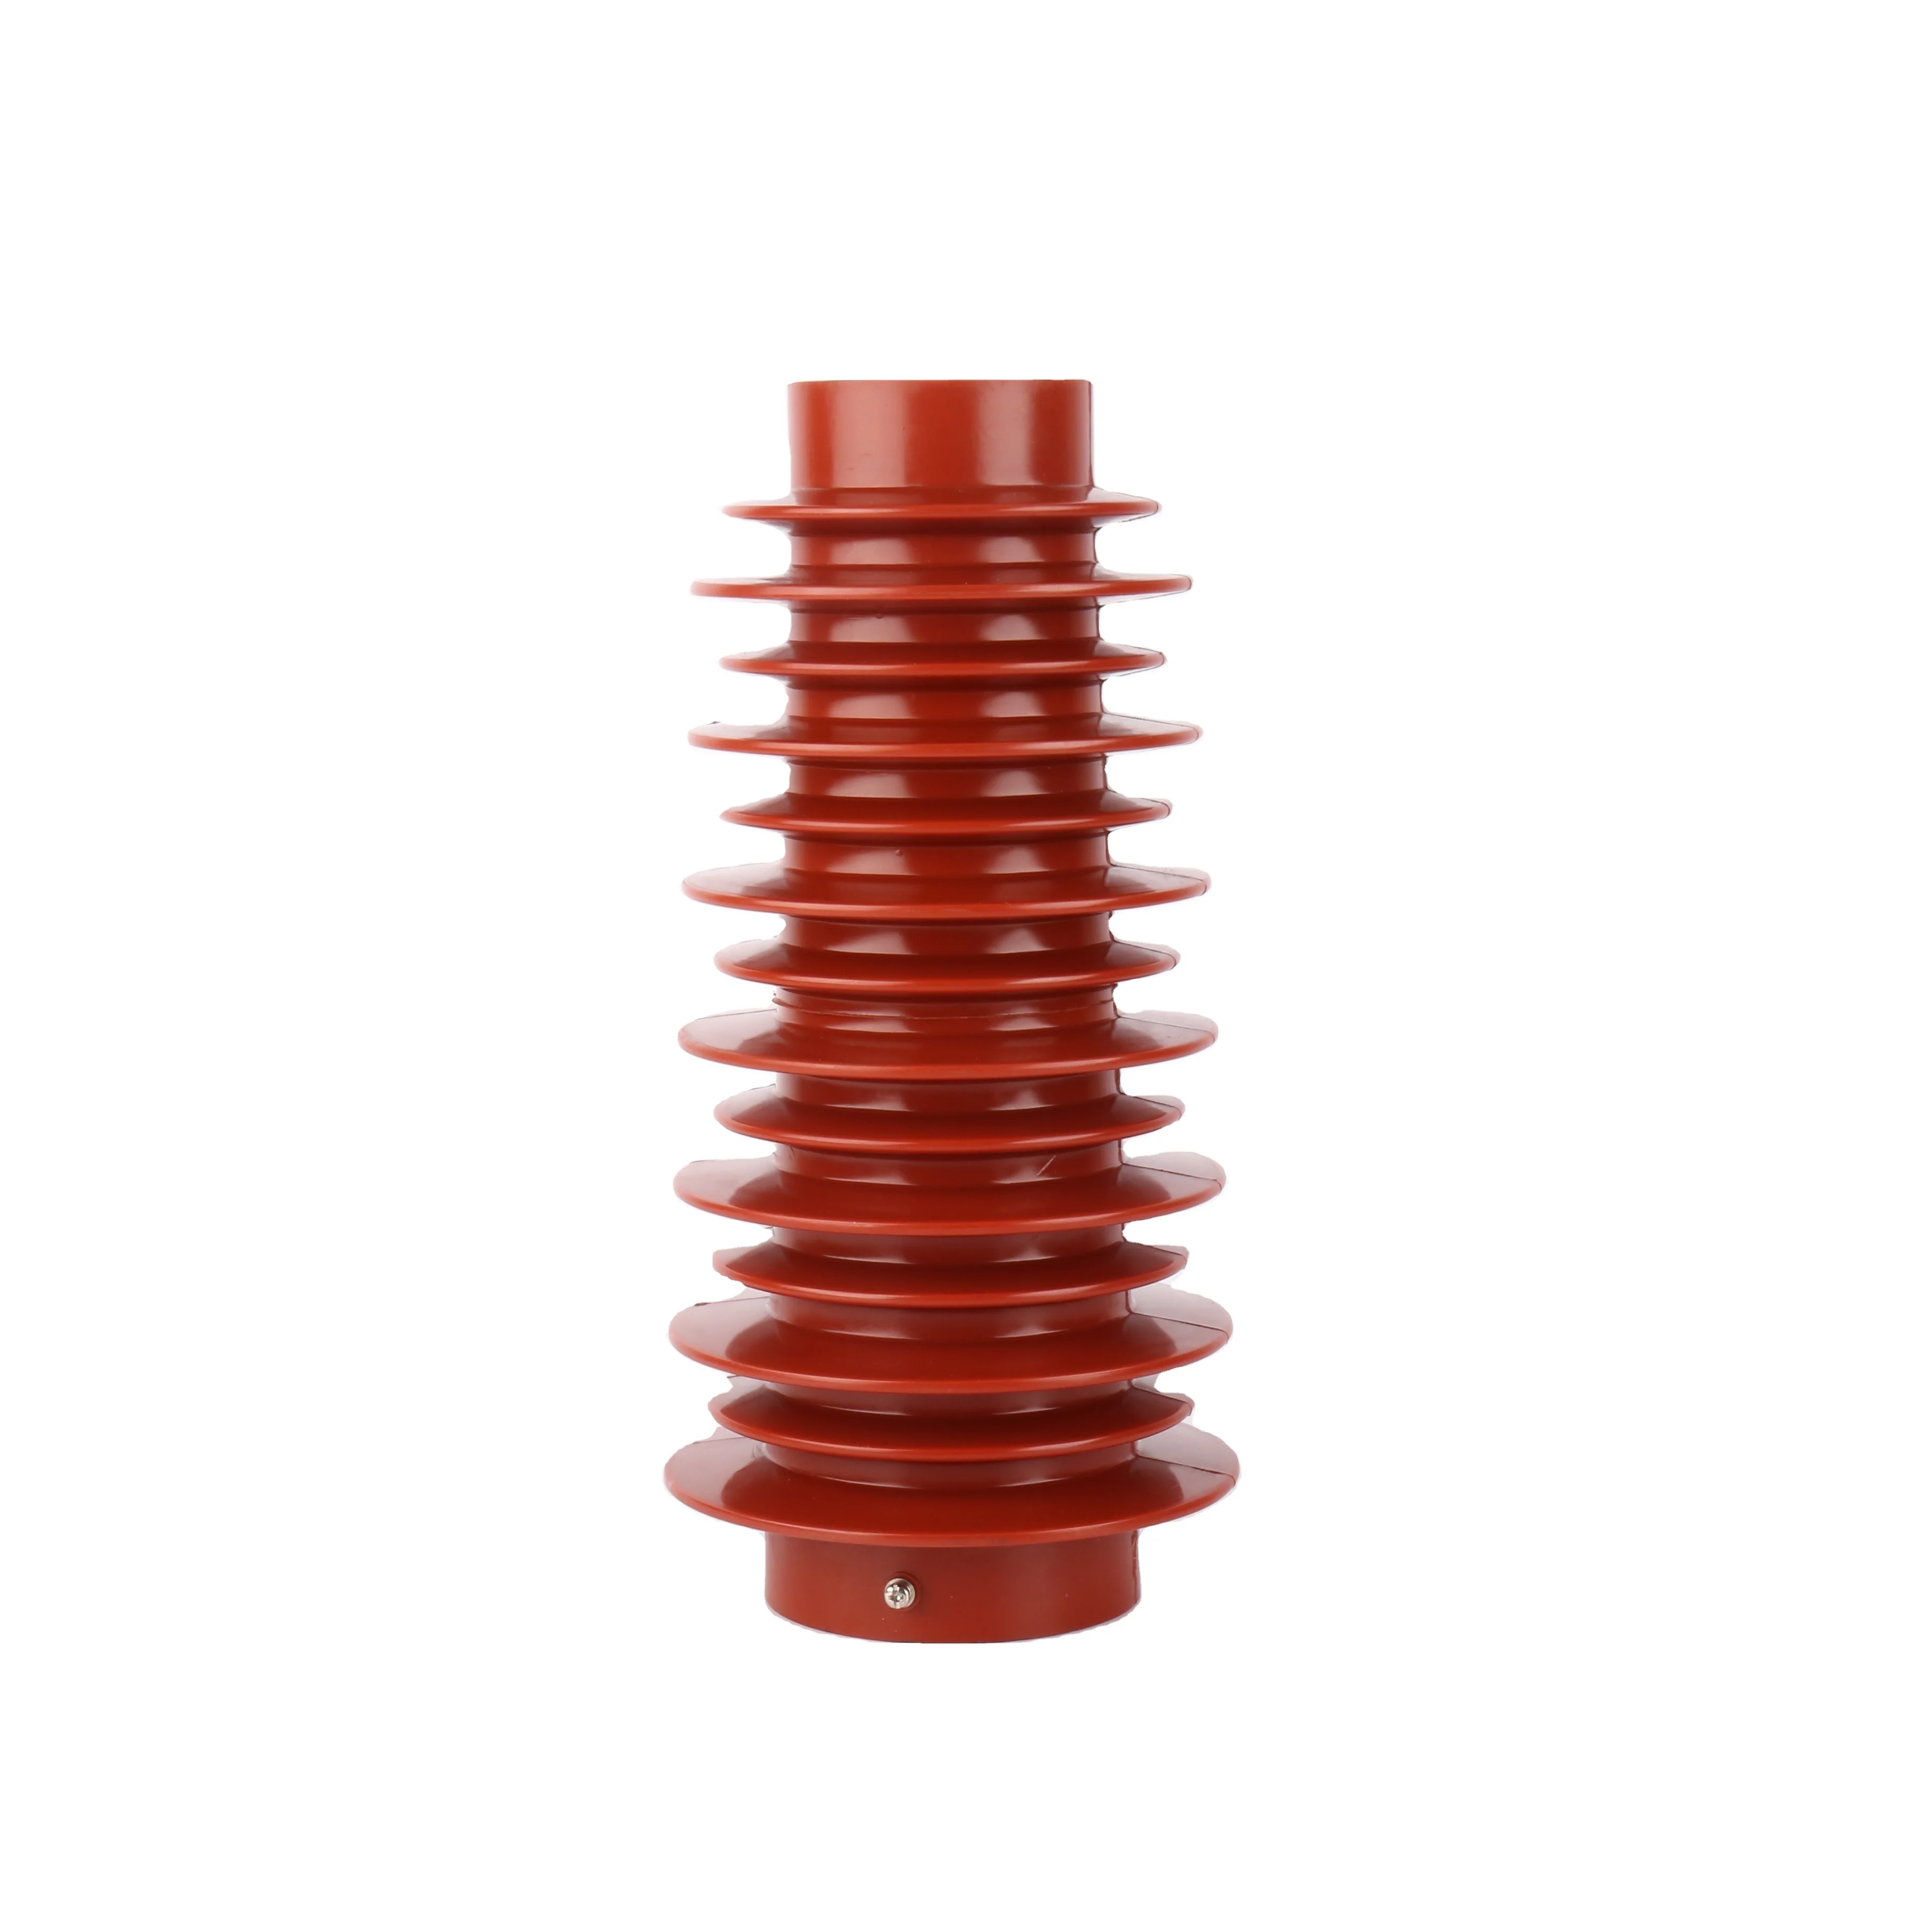 YUEQING DUWAI 35KV Insulator ZJ-35Q 145X320 Electrical For New Energy High Voltage Insulator